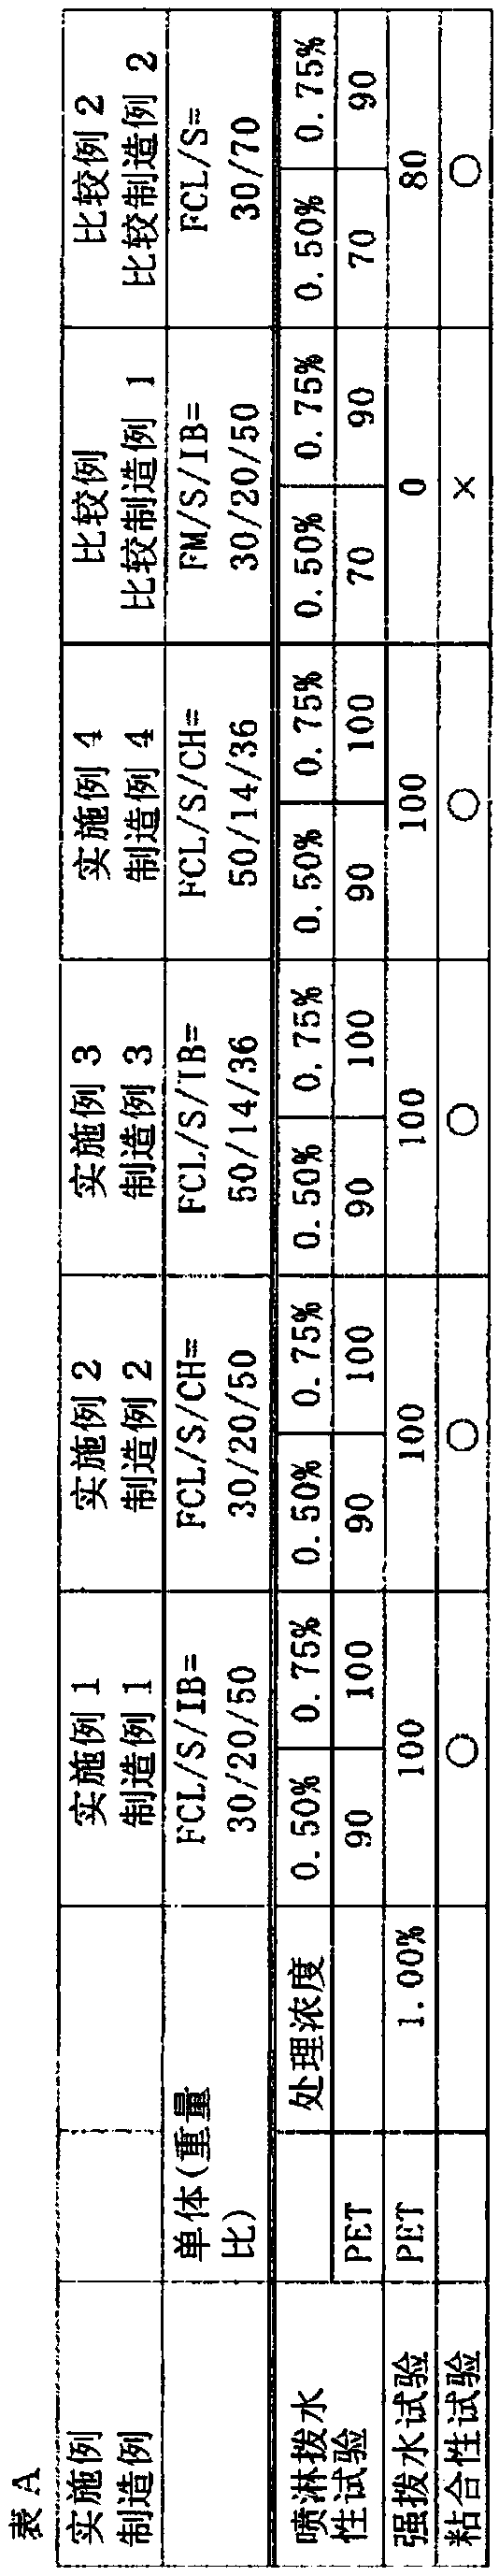 Fluorine-containing composition and fluoropolymer